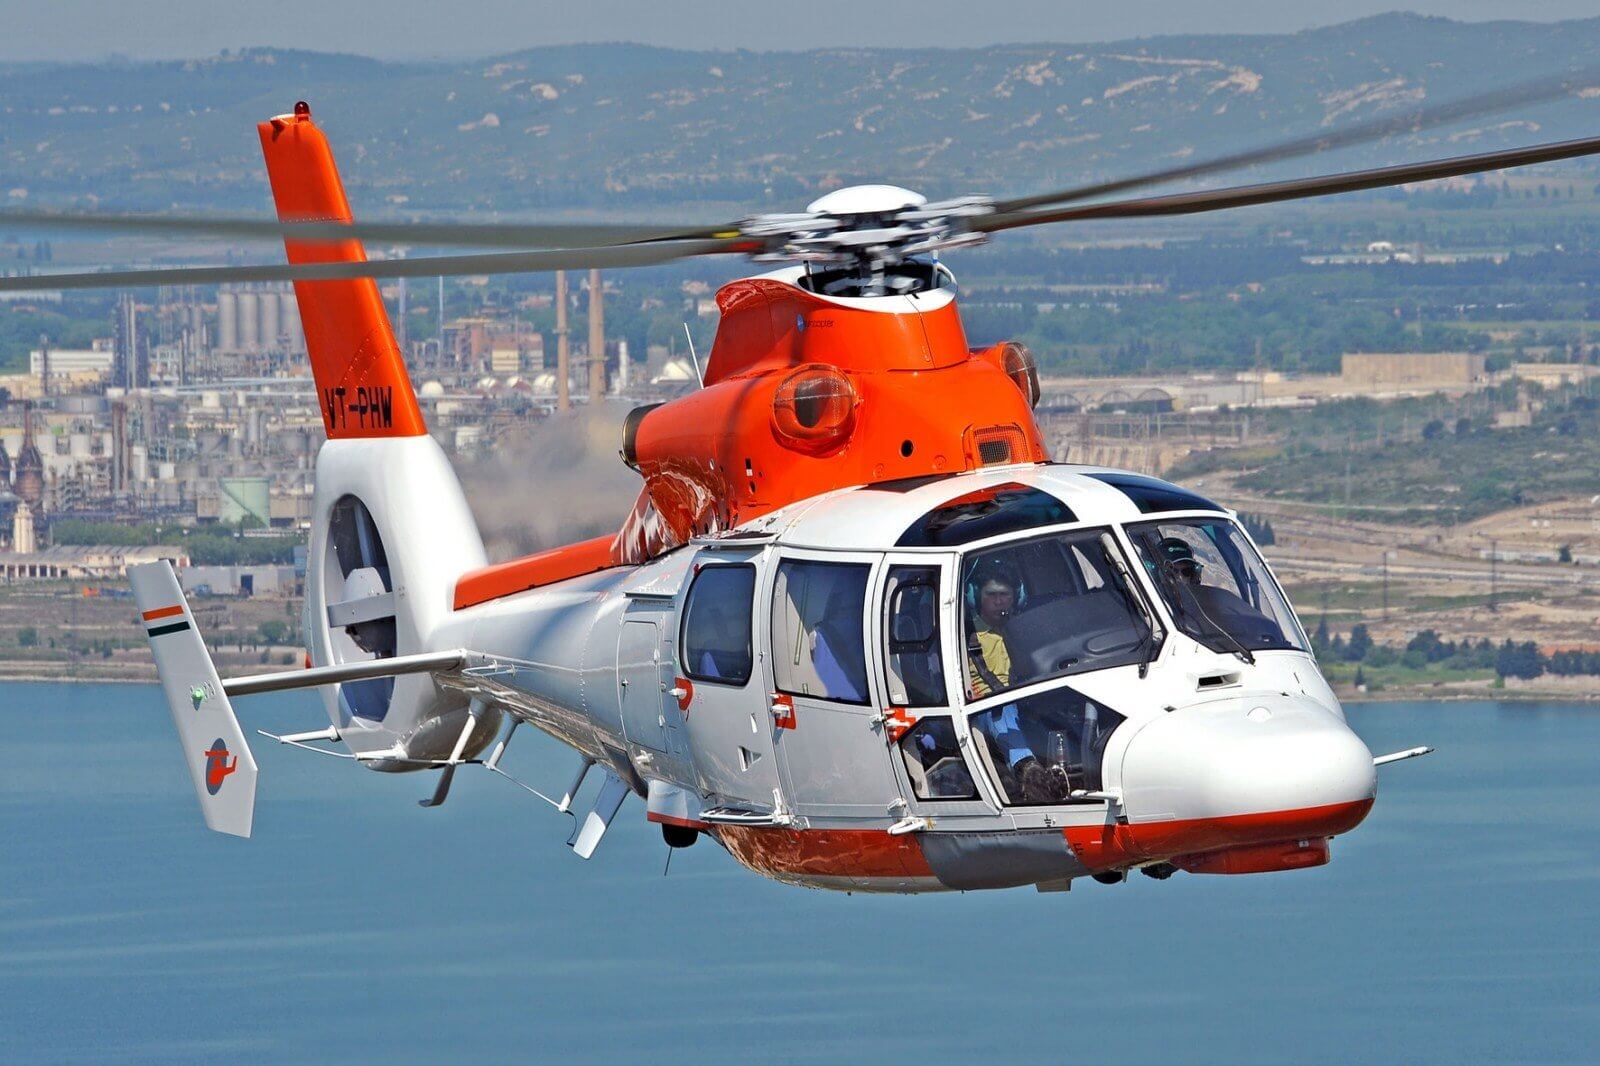 A Pawan Hans Airbus AS365 Dauphin, shown for representational purposes only, flies offshore. Airbus Helicopters Photo